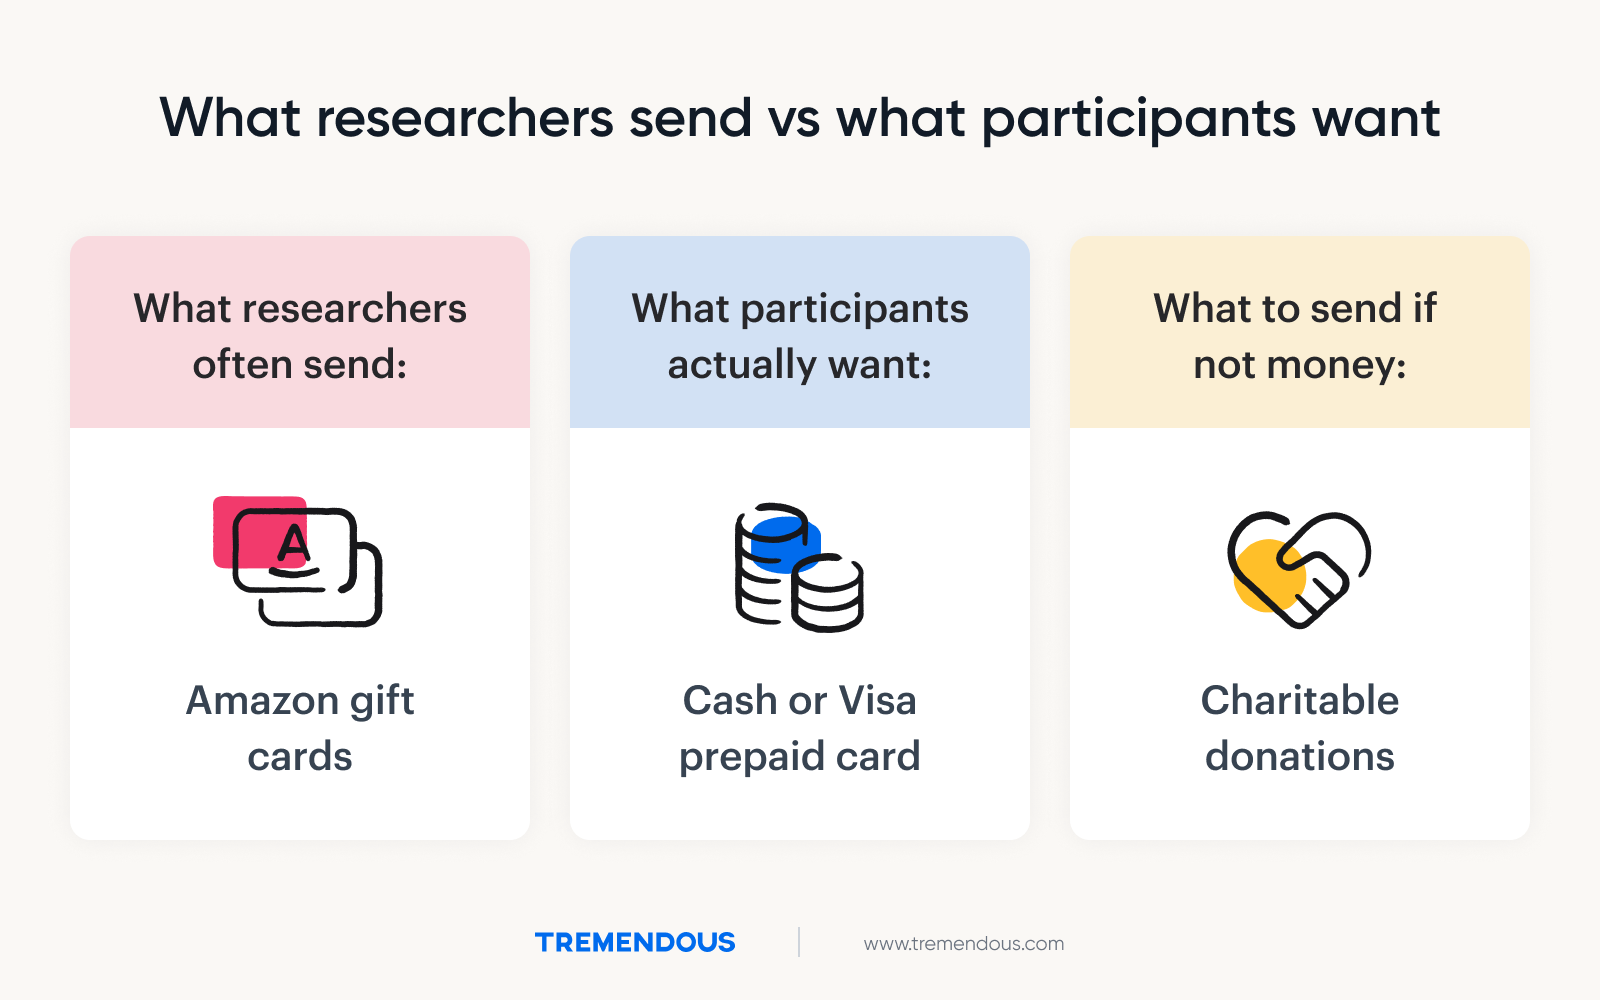 A graphic showing that what participants actually want in exchange for their time is money, not gift cards.